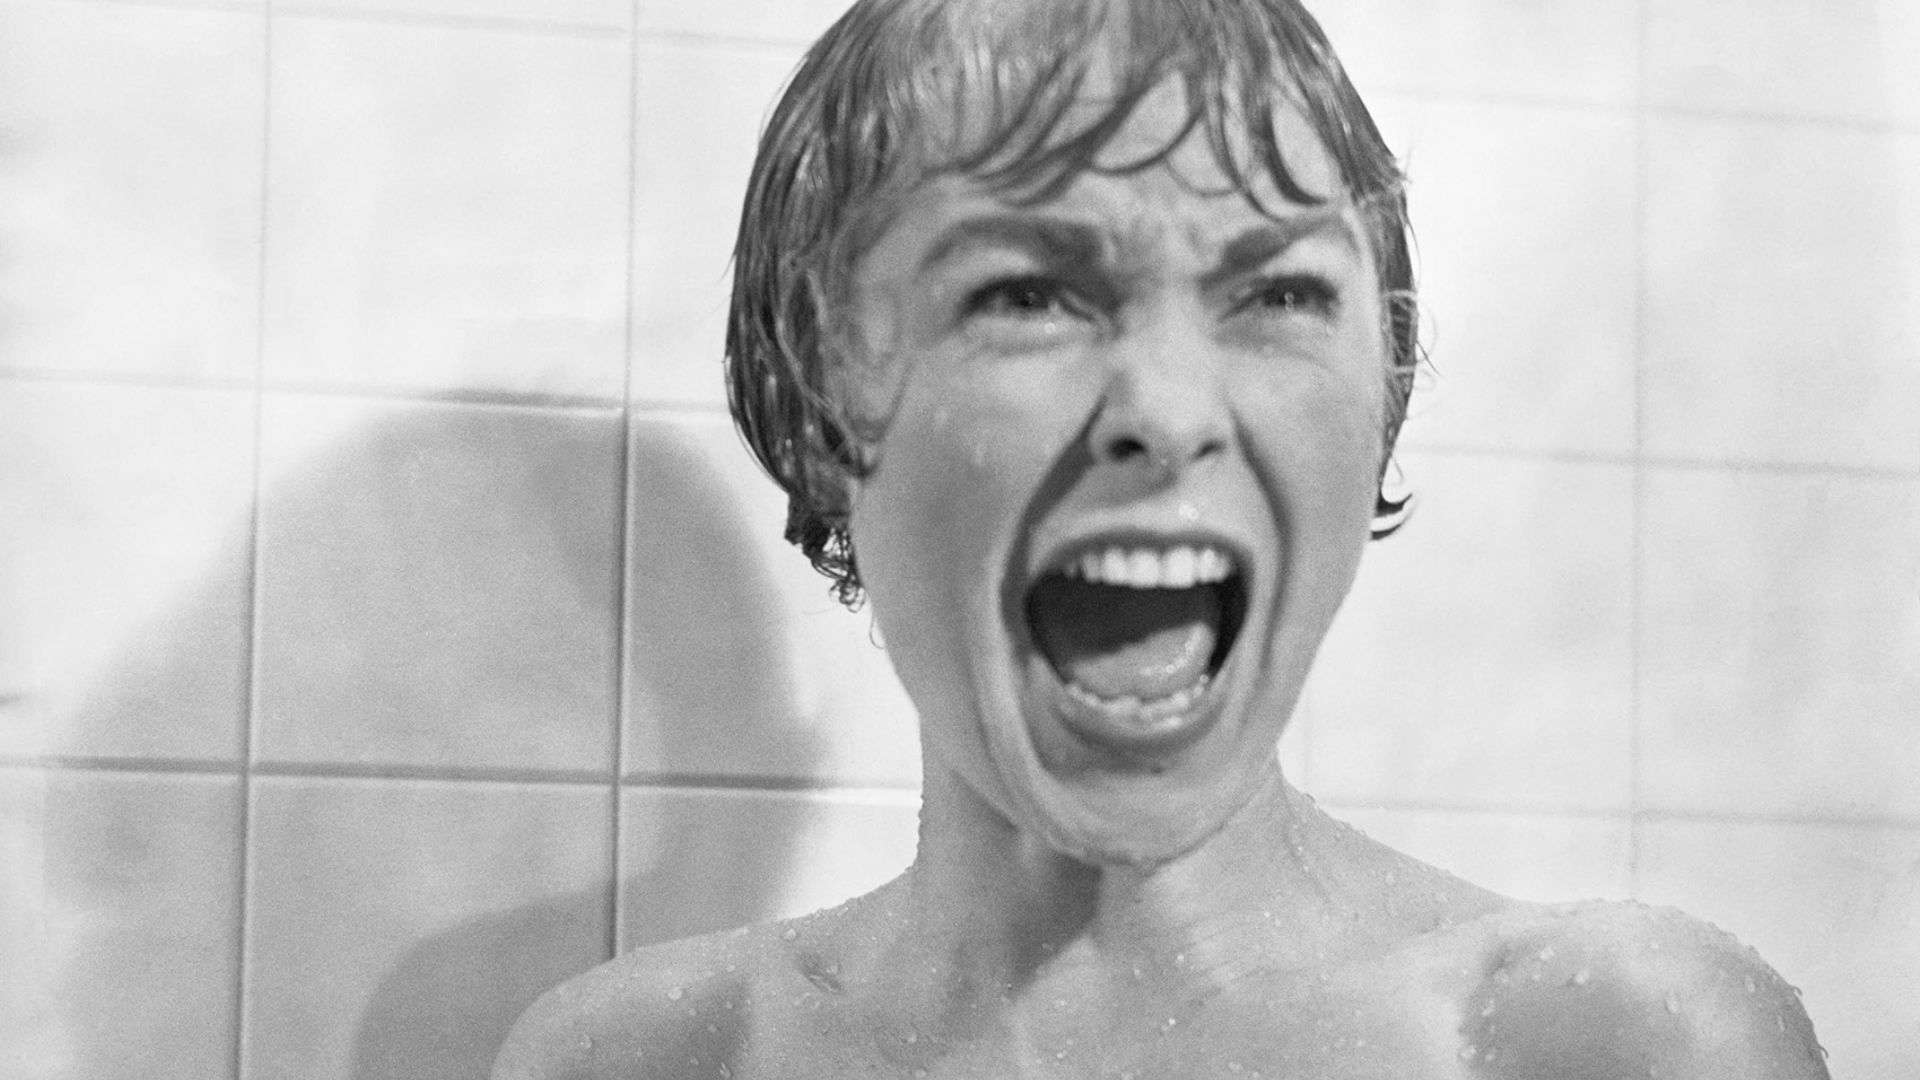  A woman screams in the shower in this image from Shamley Productions.